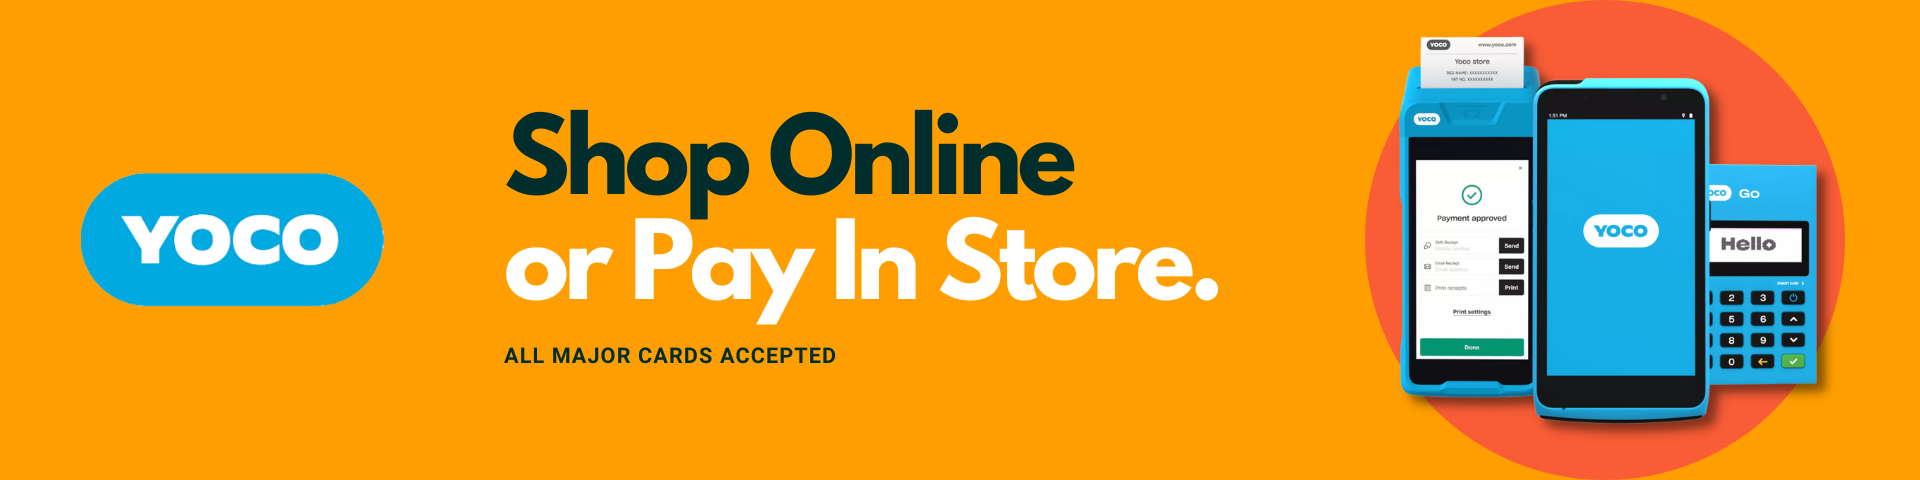 Yoco, online payment gateway, pet image - South Africa’s No.1 ePet Store for premium pet products, online pet shopping, best pet store near me, dog beds, dog bed, plush dog bed, washable dog bed, fluffy dog bed, calming dog bed, takealot dog bed, iremia dog, dog food, pet food, cat food, dog collar, dog leash, dog harness, dog harnesses, dog collars, dog leashes, dog bowls, pet bowls, slow feeders, slow feeding dog bowls, slow feeder dog bowls, Complete Pet Nutrition